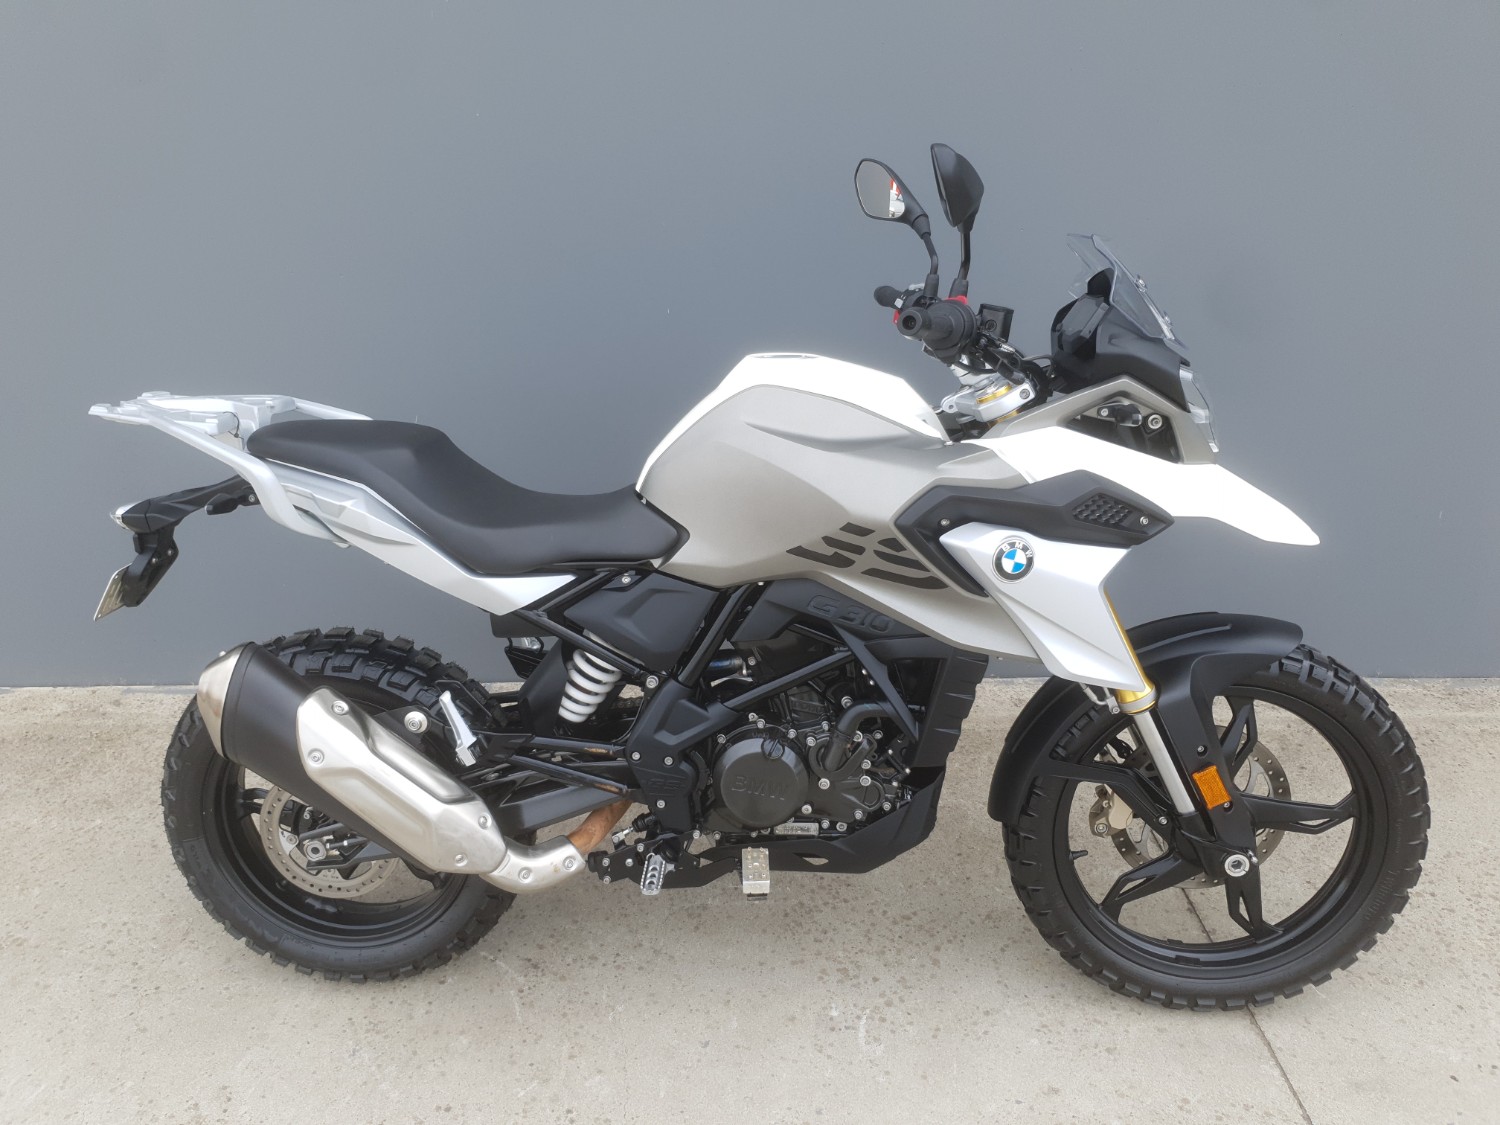 2021 BMW G 310 GS Motorcycle Image 20